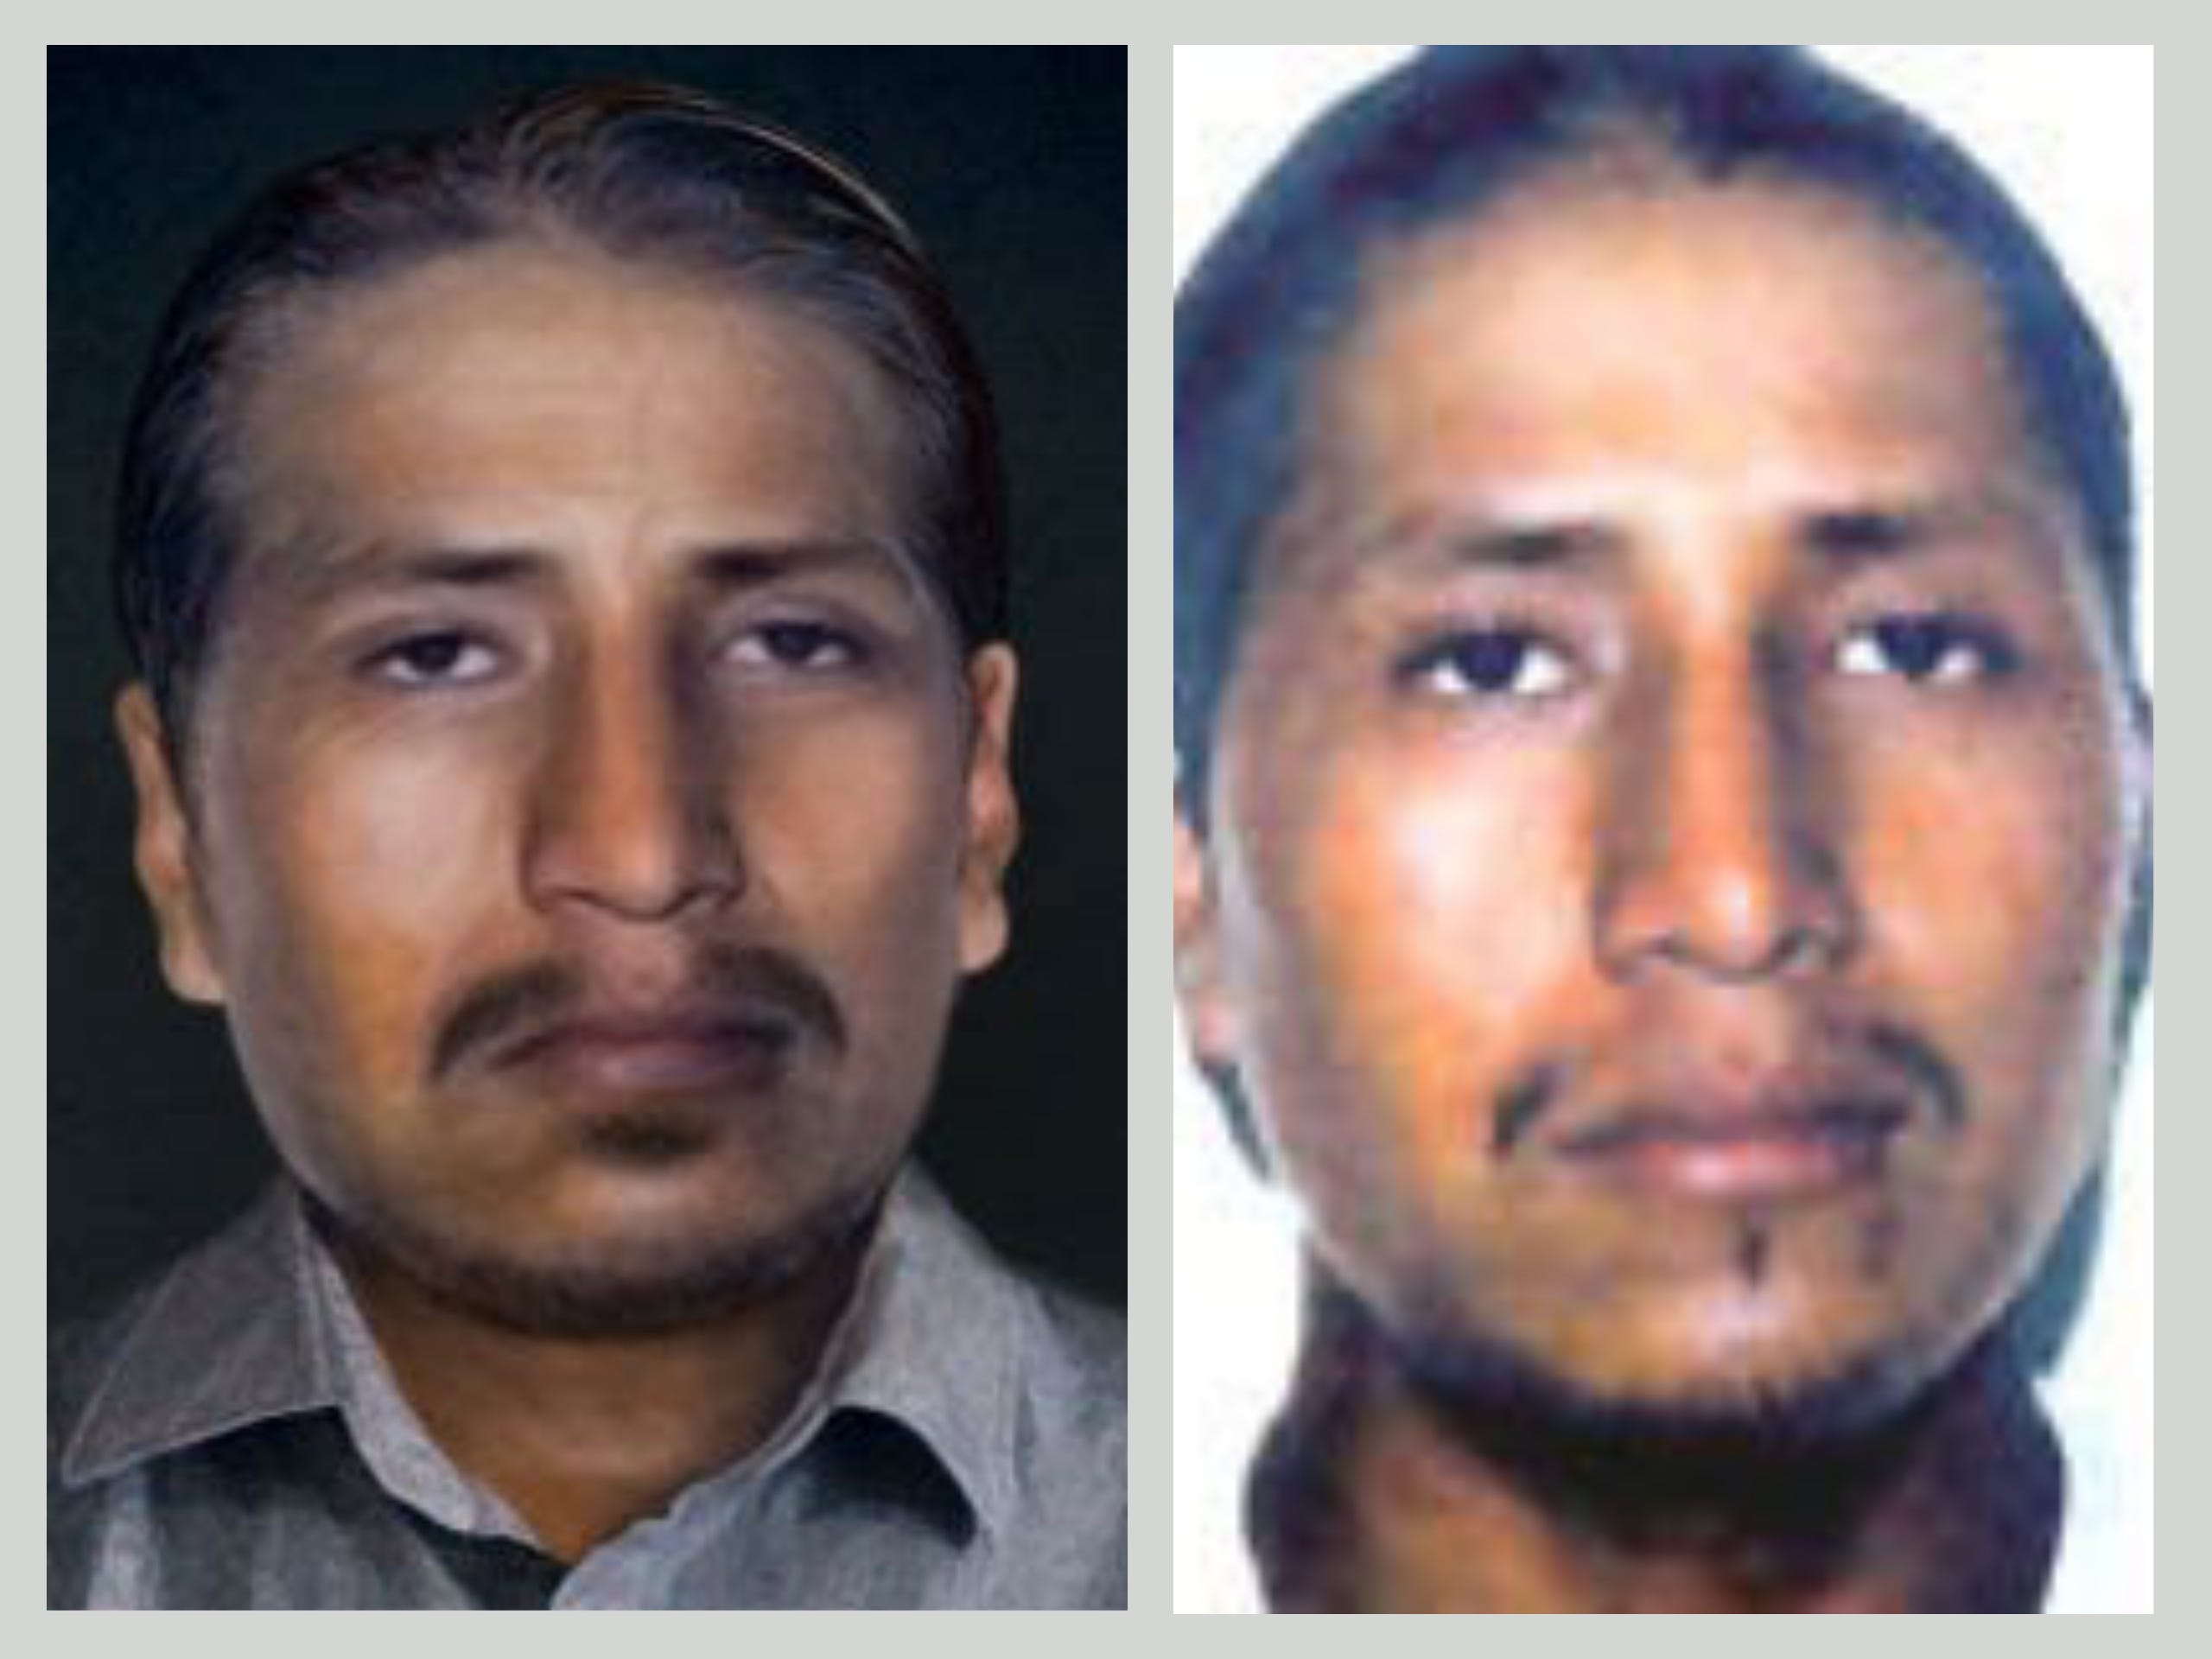 Felipe Santos in an age progressed image and before he disappeared in October 2003.